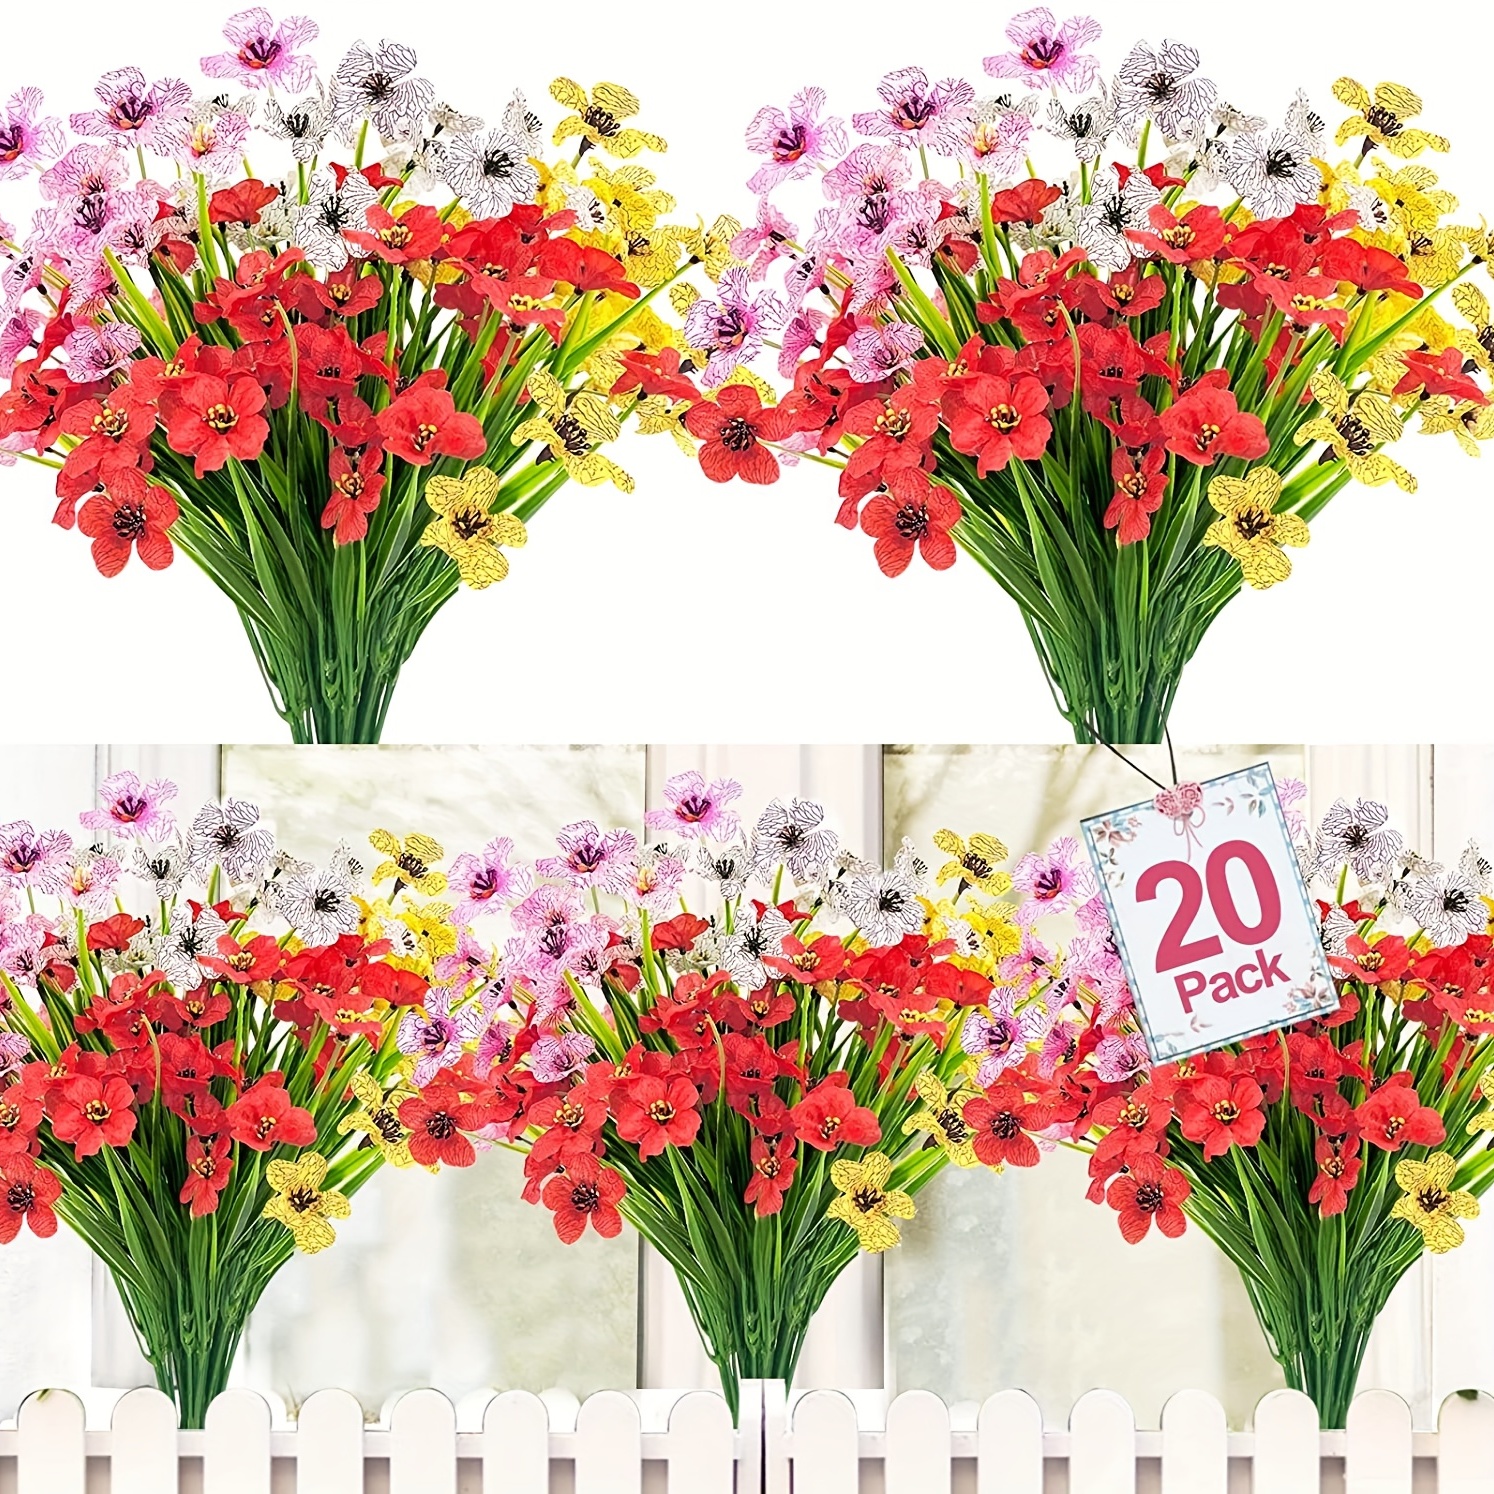 

20 Bundles Orchid Artificial Flowers For Outdoors Uv Resistant Outdoor Flowers, Fake Flowers Outside Faux Flowers Plastic Fake Plant For Planters Home Garden Summer Decor, Room Decor, Home Decor